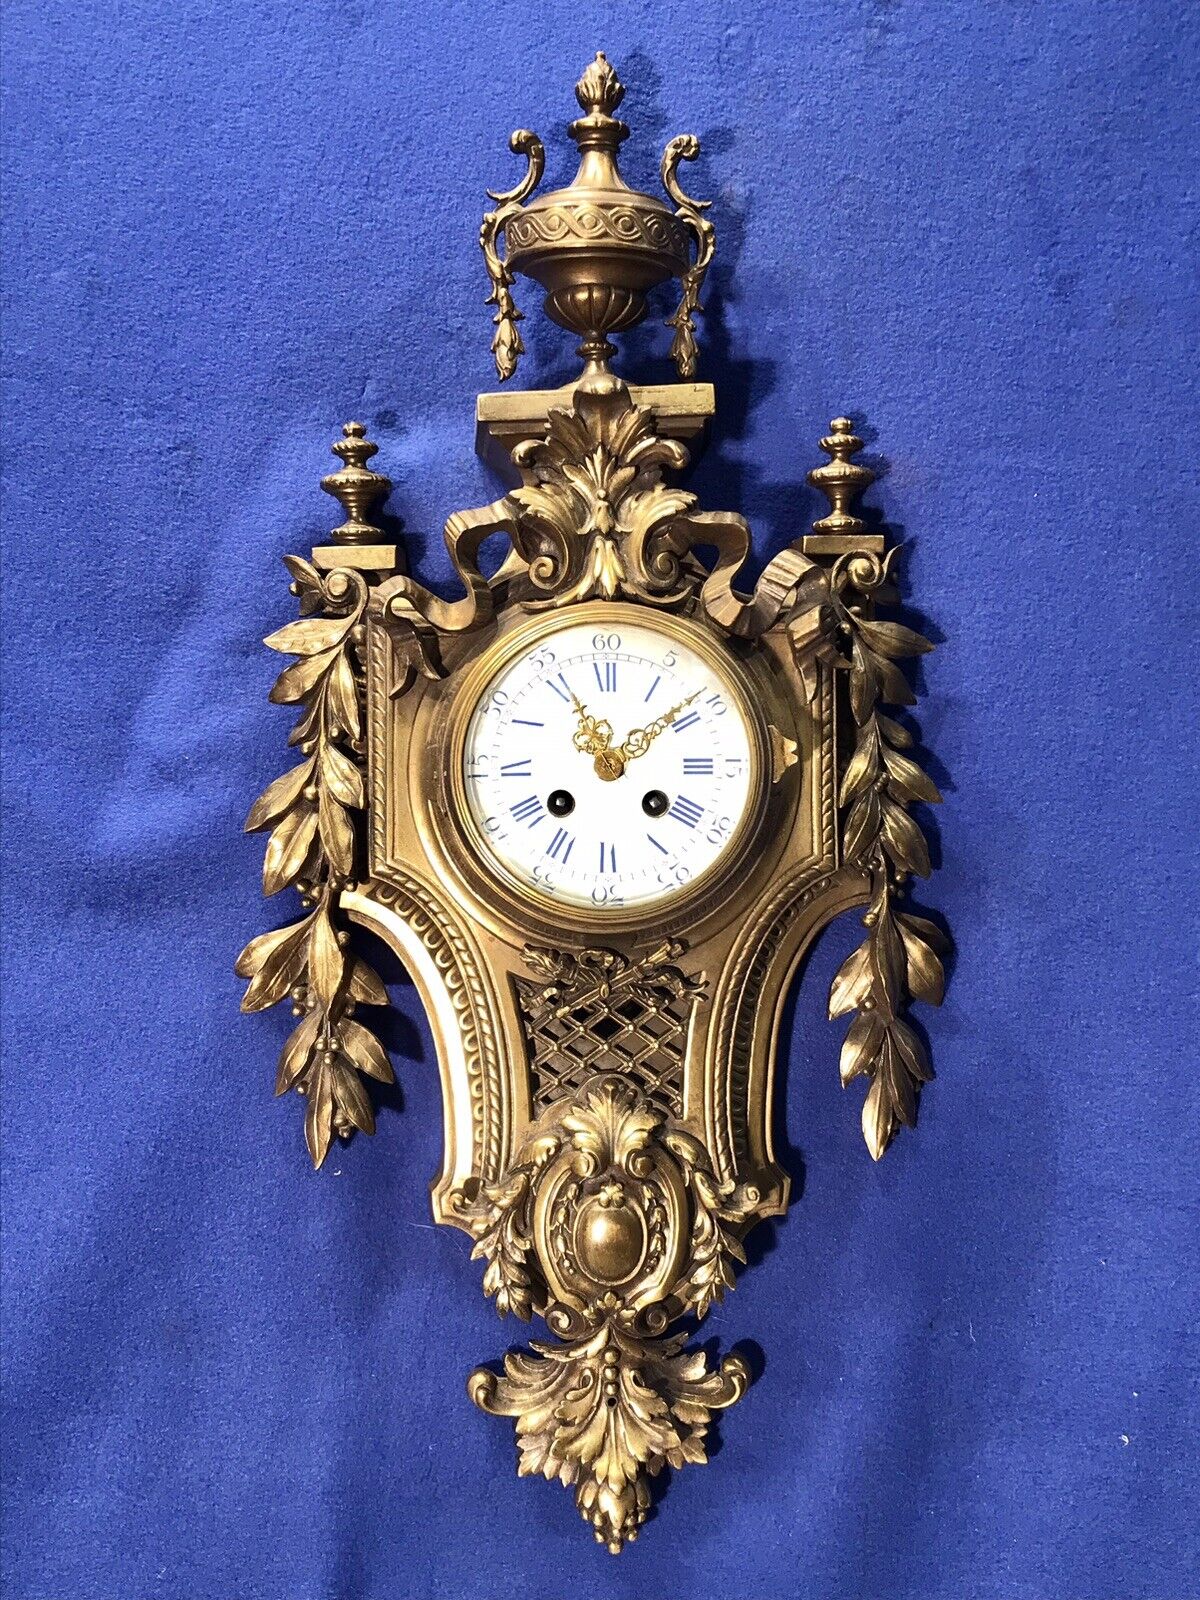 1844 ANTIQUE FRENCH JAPY FRERES STRIKES KEY WOUND,SOLID BRONZE,WALL CLOCK